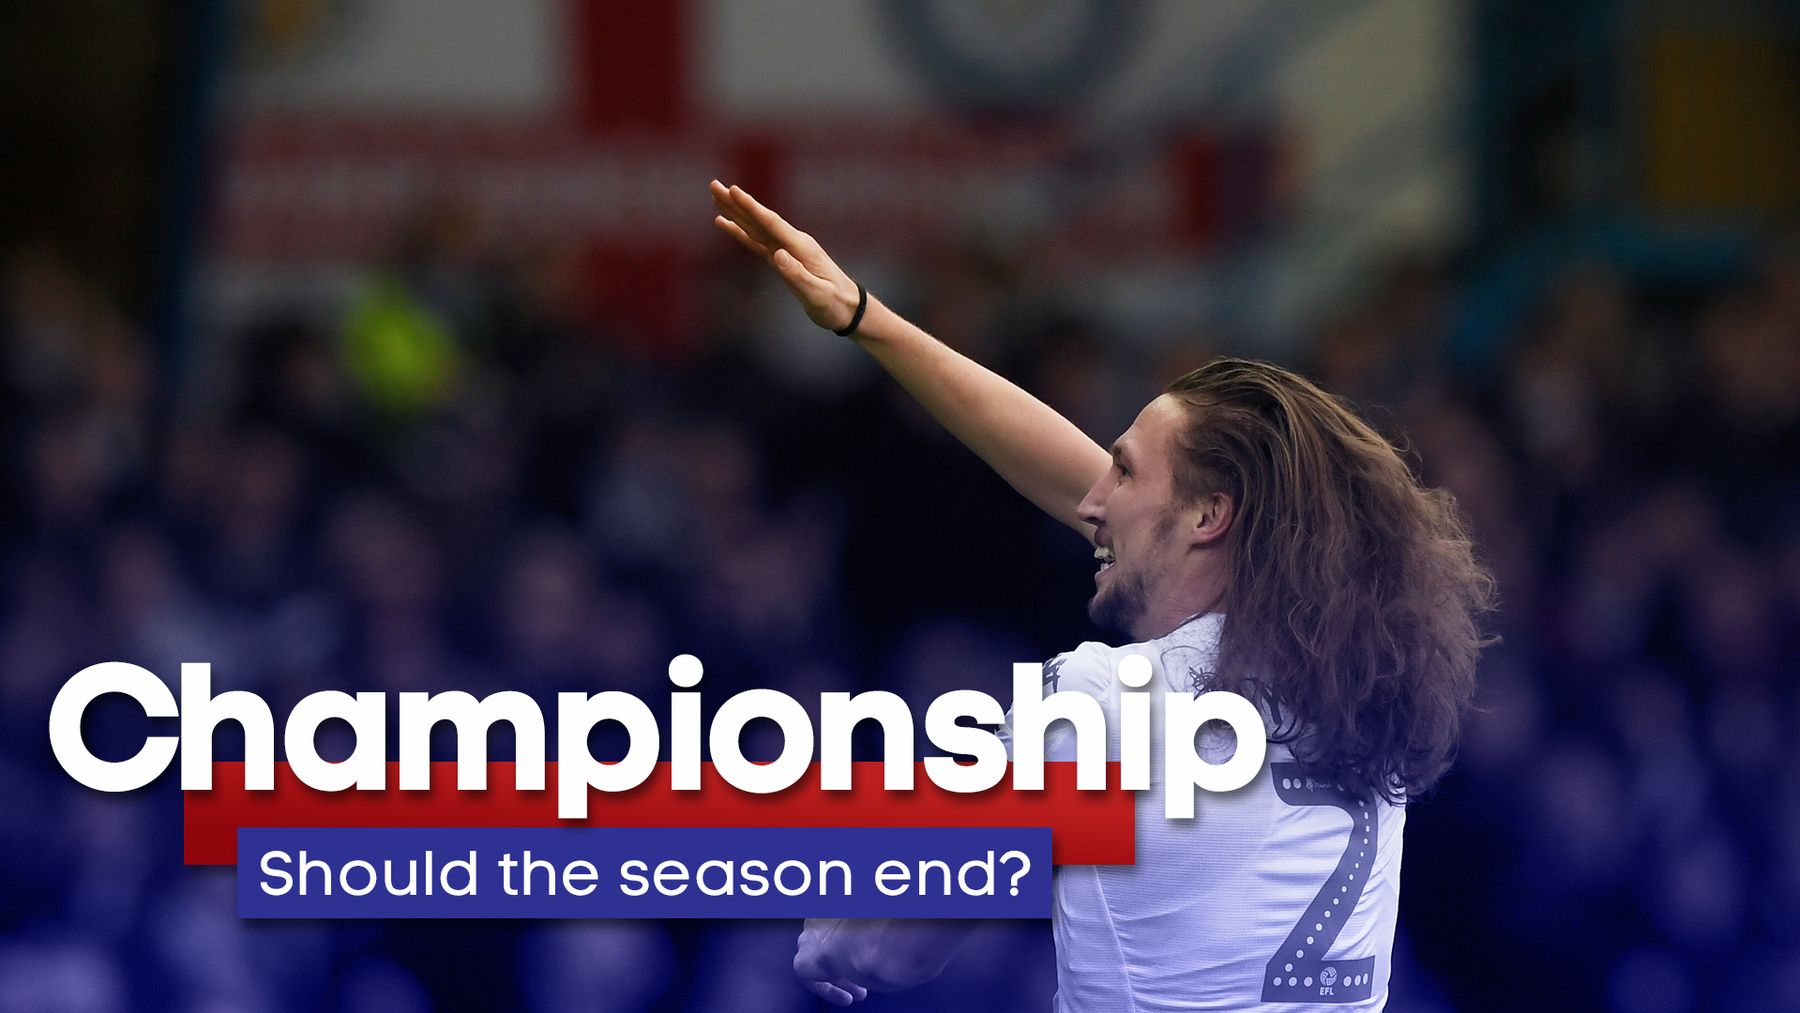 Sky Bet Championship: per game average? Take results? How could the season end?